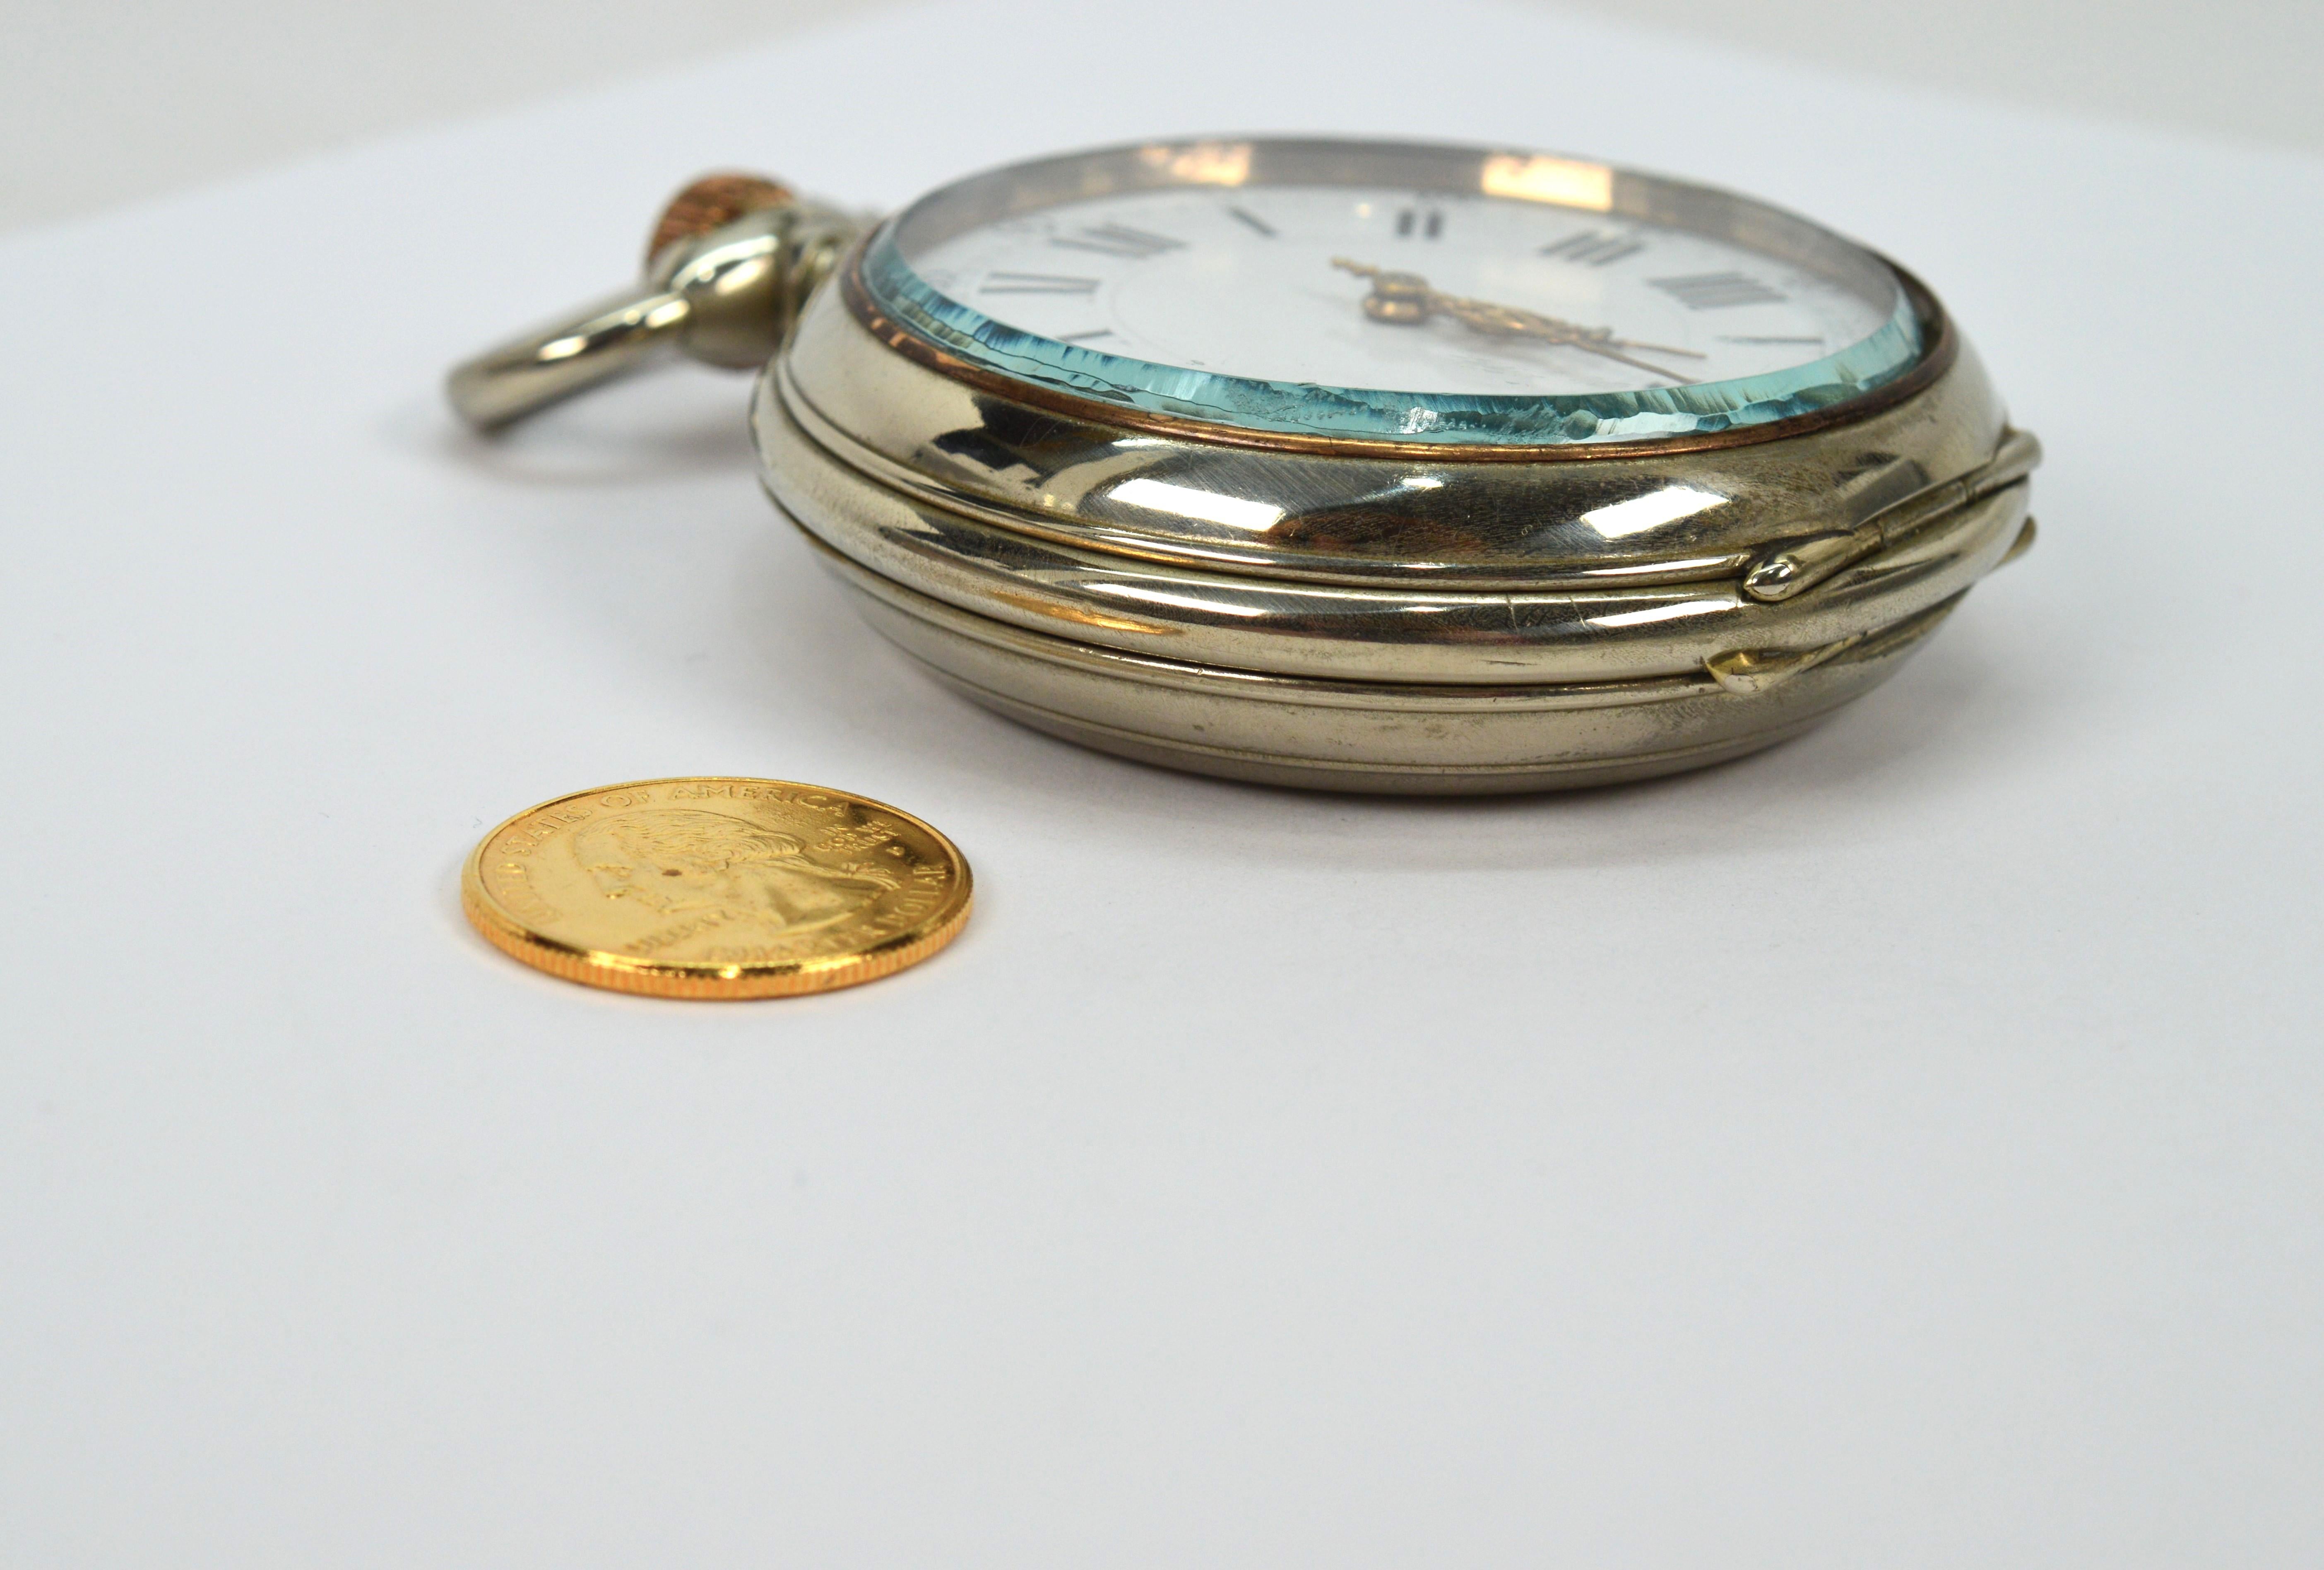 Late 19th Century Large Desk Size Nickel Pocket Watch For Sale 3